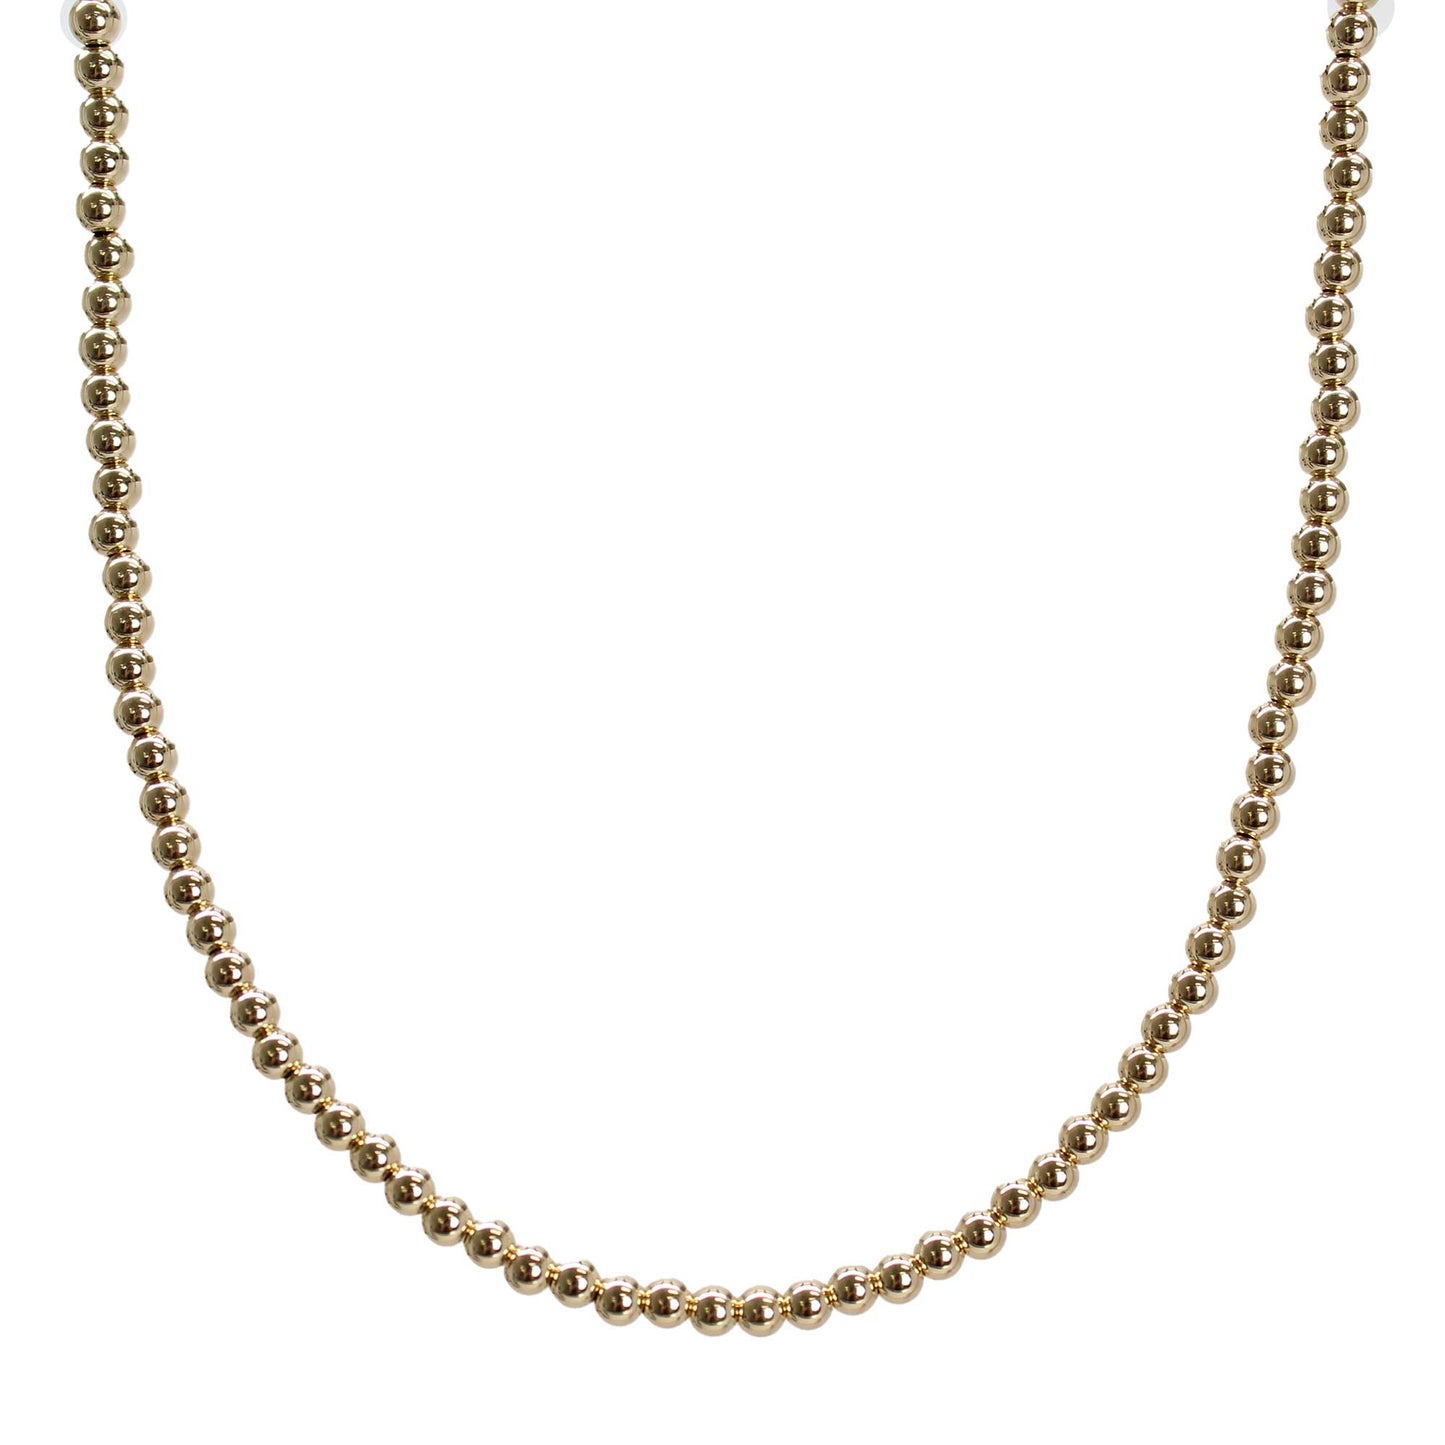 3mm Yellow Gold Filled Bead Necklace Strand